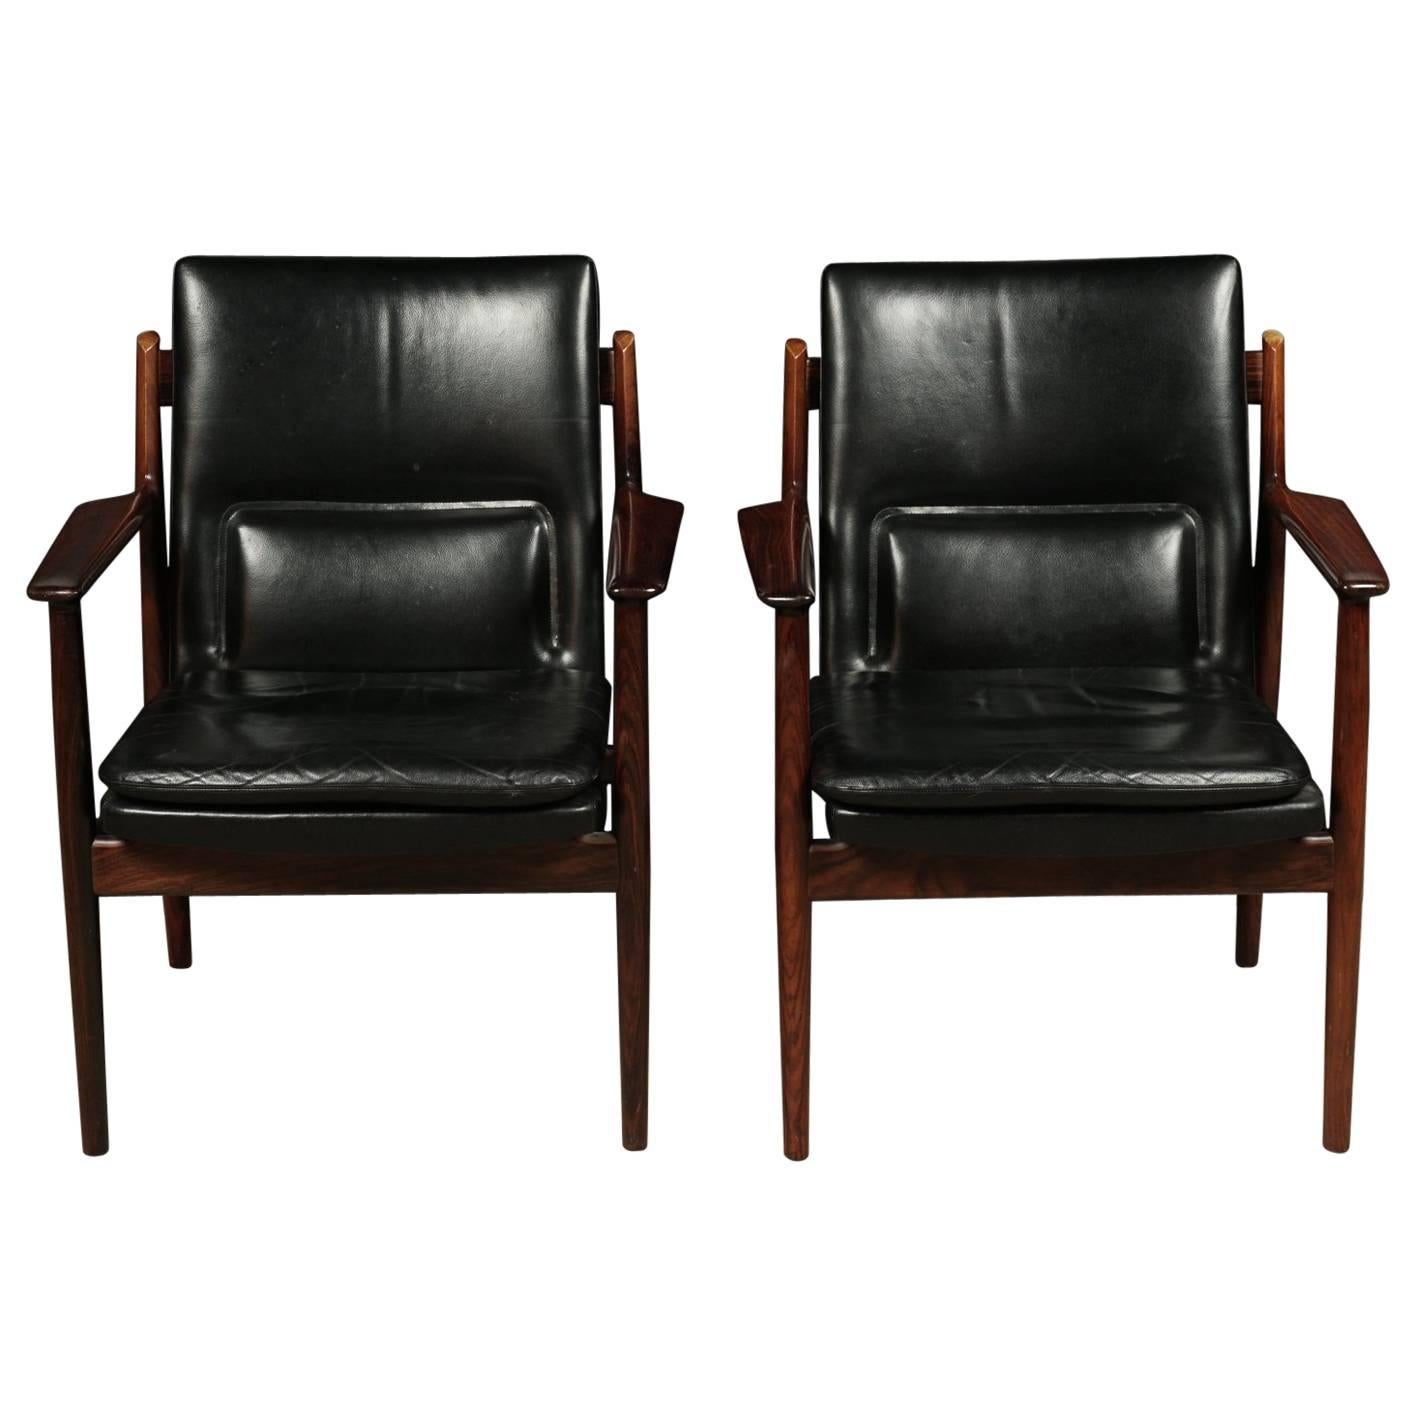 Pair of Lounge Chairs From Denmark, Designed by Arne Vodder, circa 1960